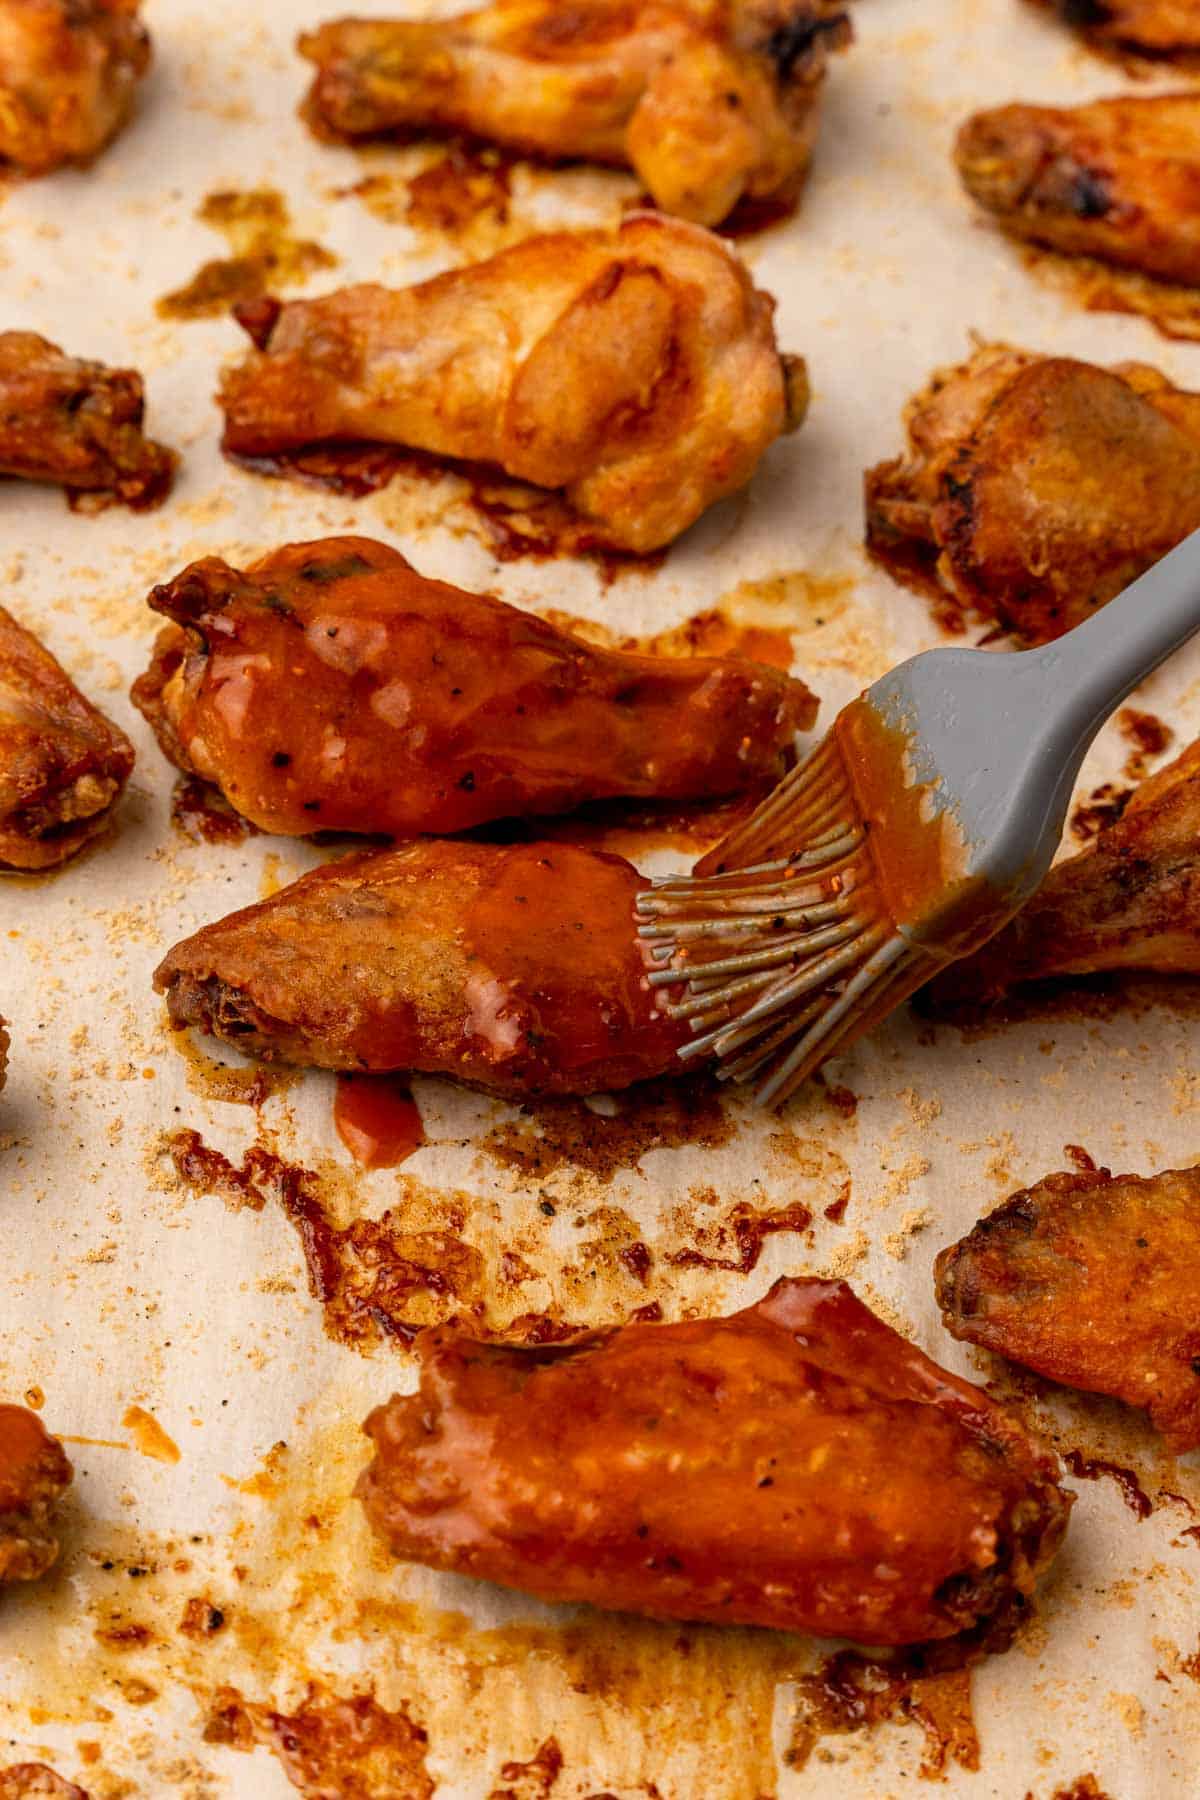 Brush coating the cooked chicken wings with sauce